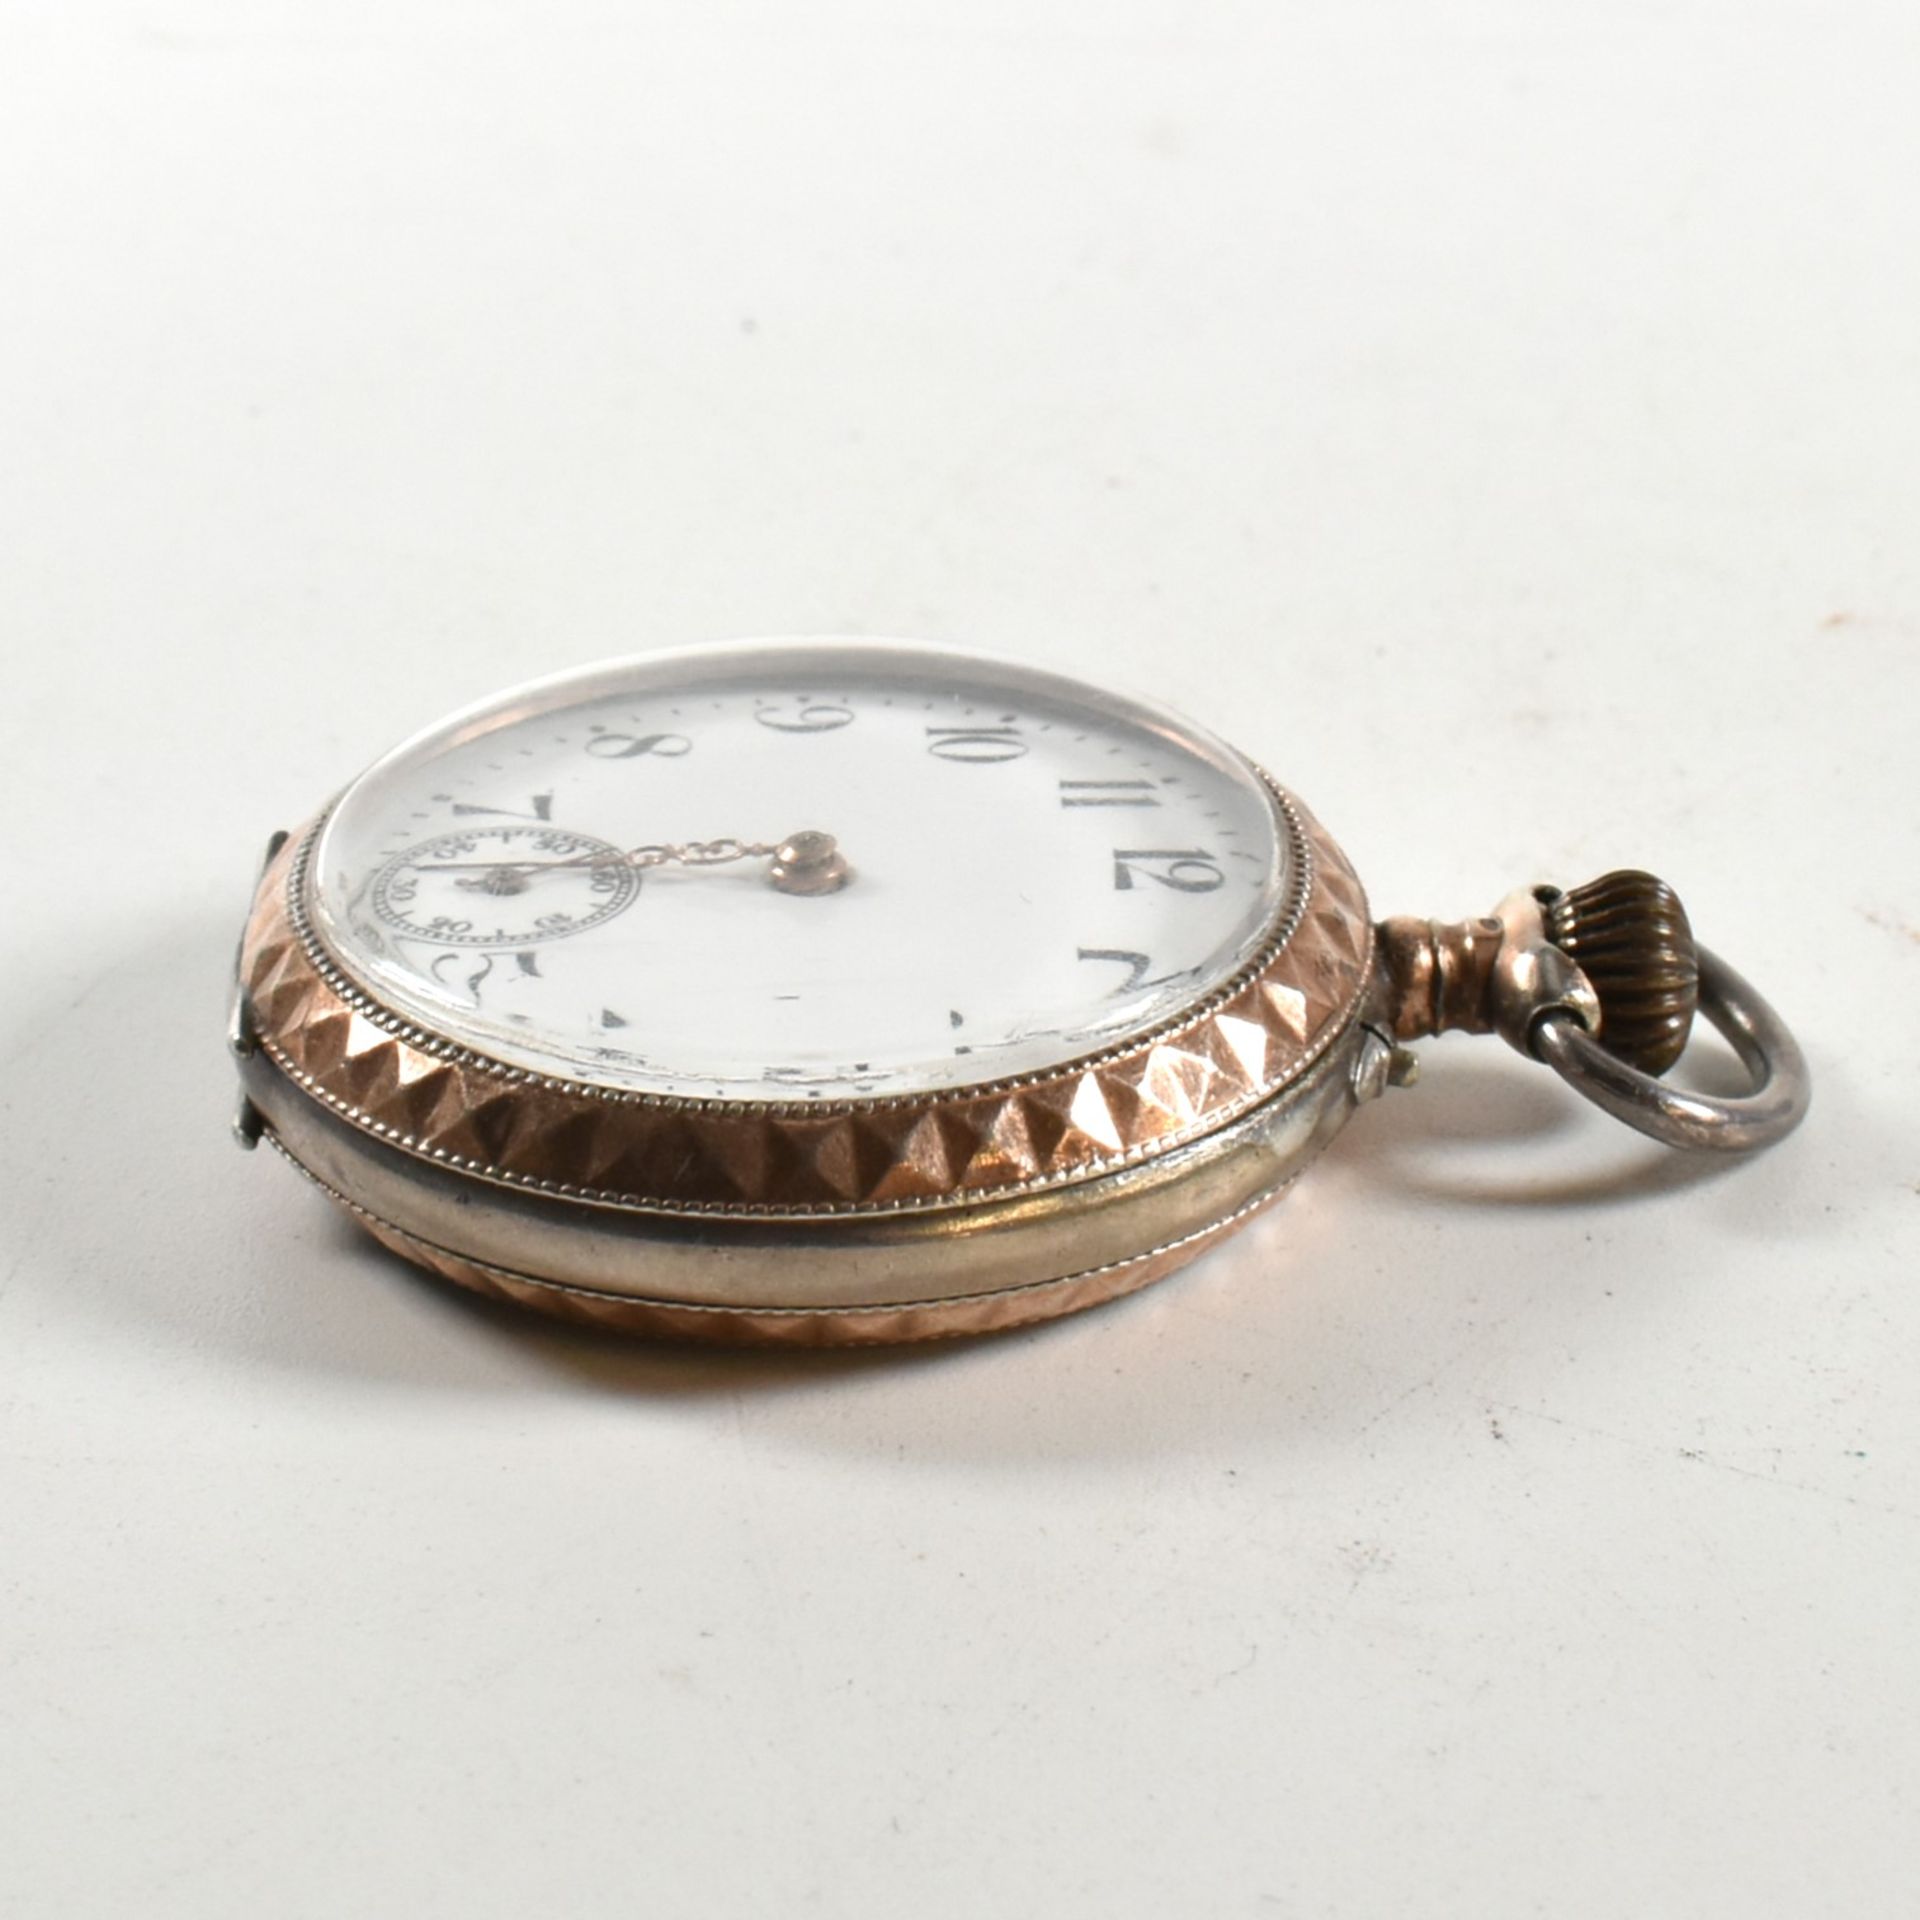 SILVER 800 CONTINENTAL OPEN FACED CROWN WIND POCKET WATCH - Image 5 of 8